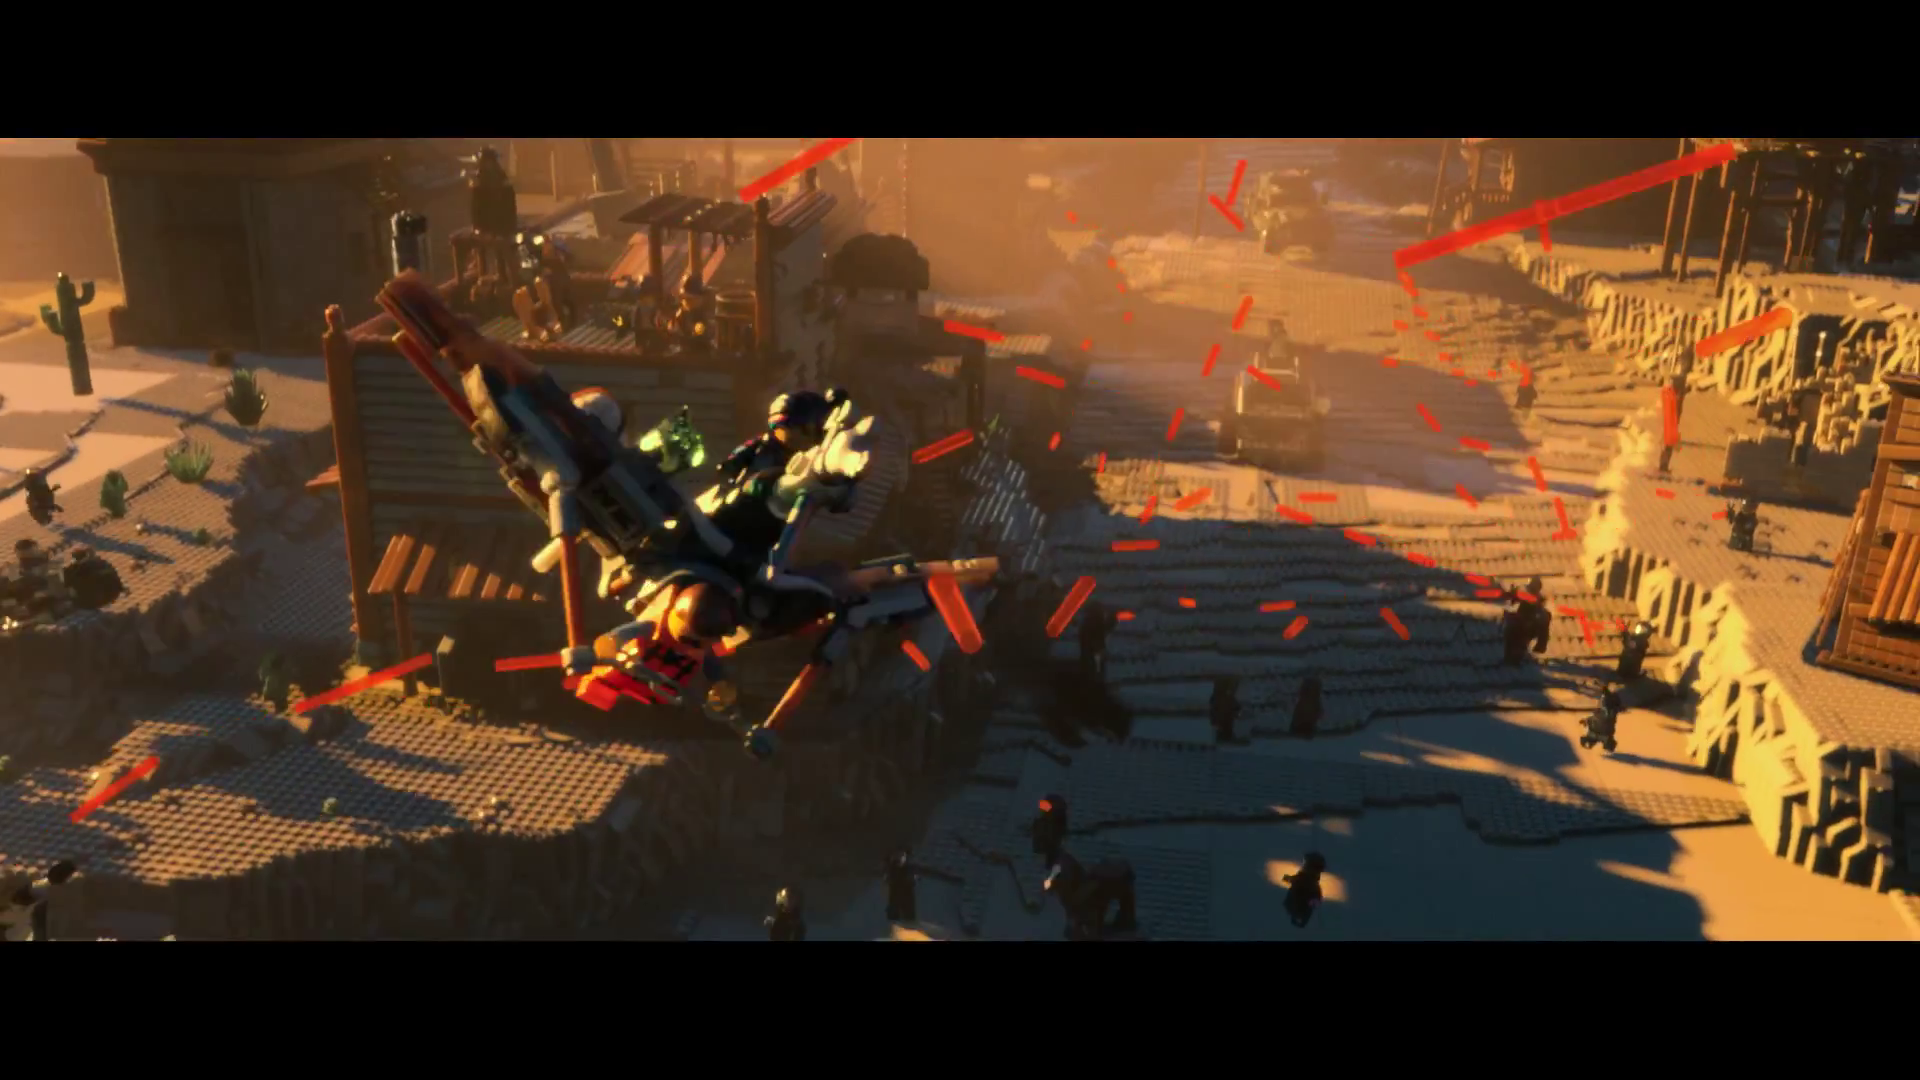 Movie The Lego Movie HD Wallpaper | Background Image